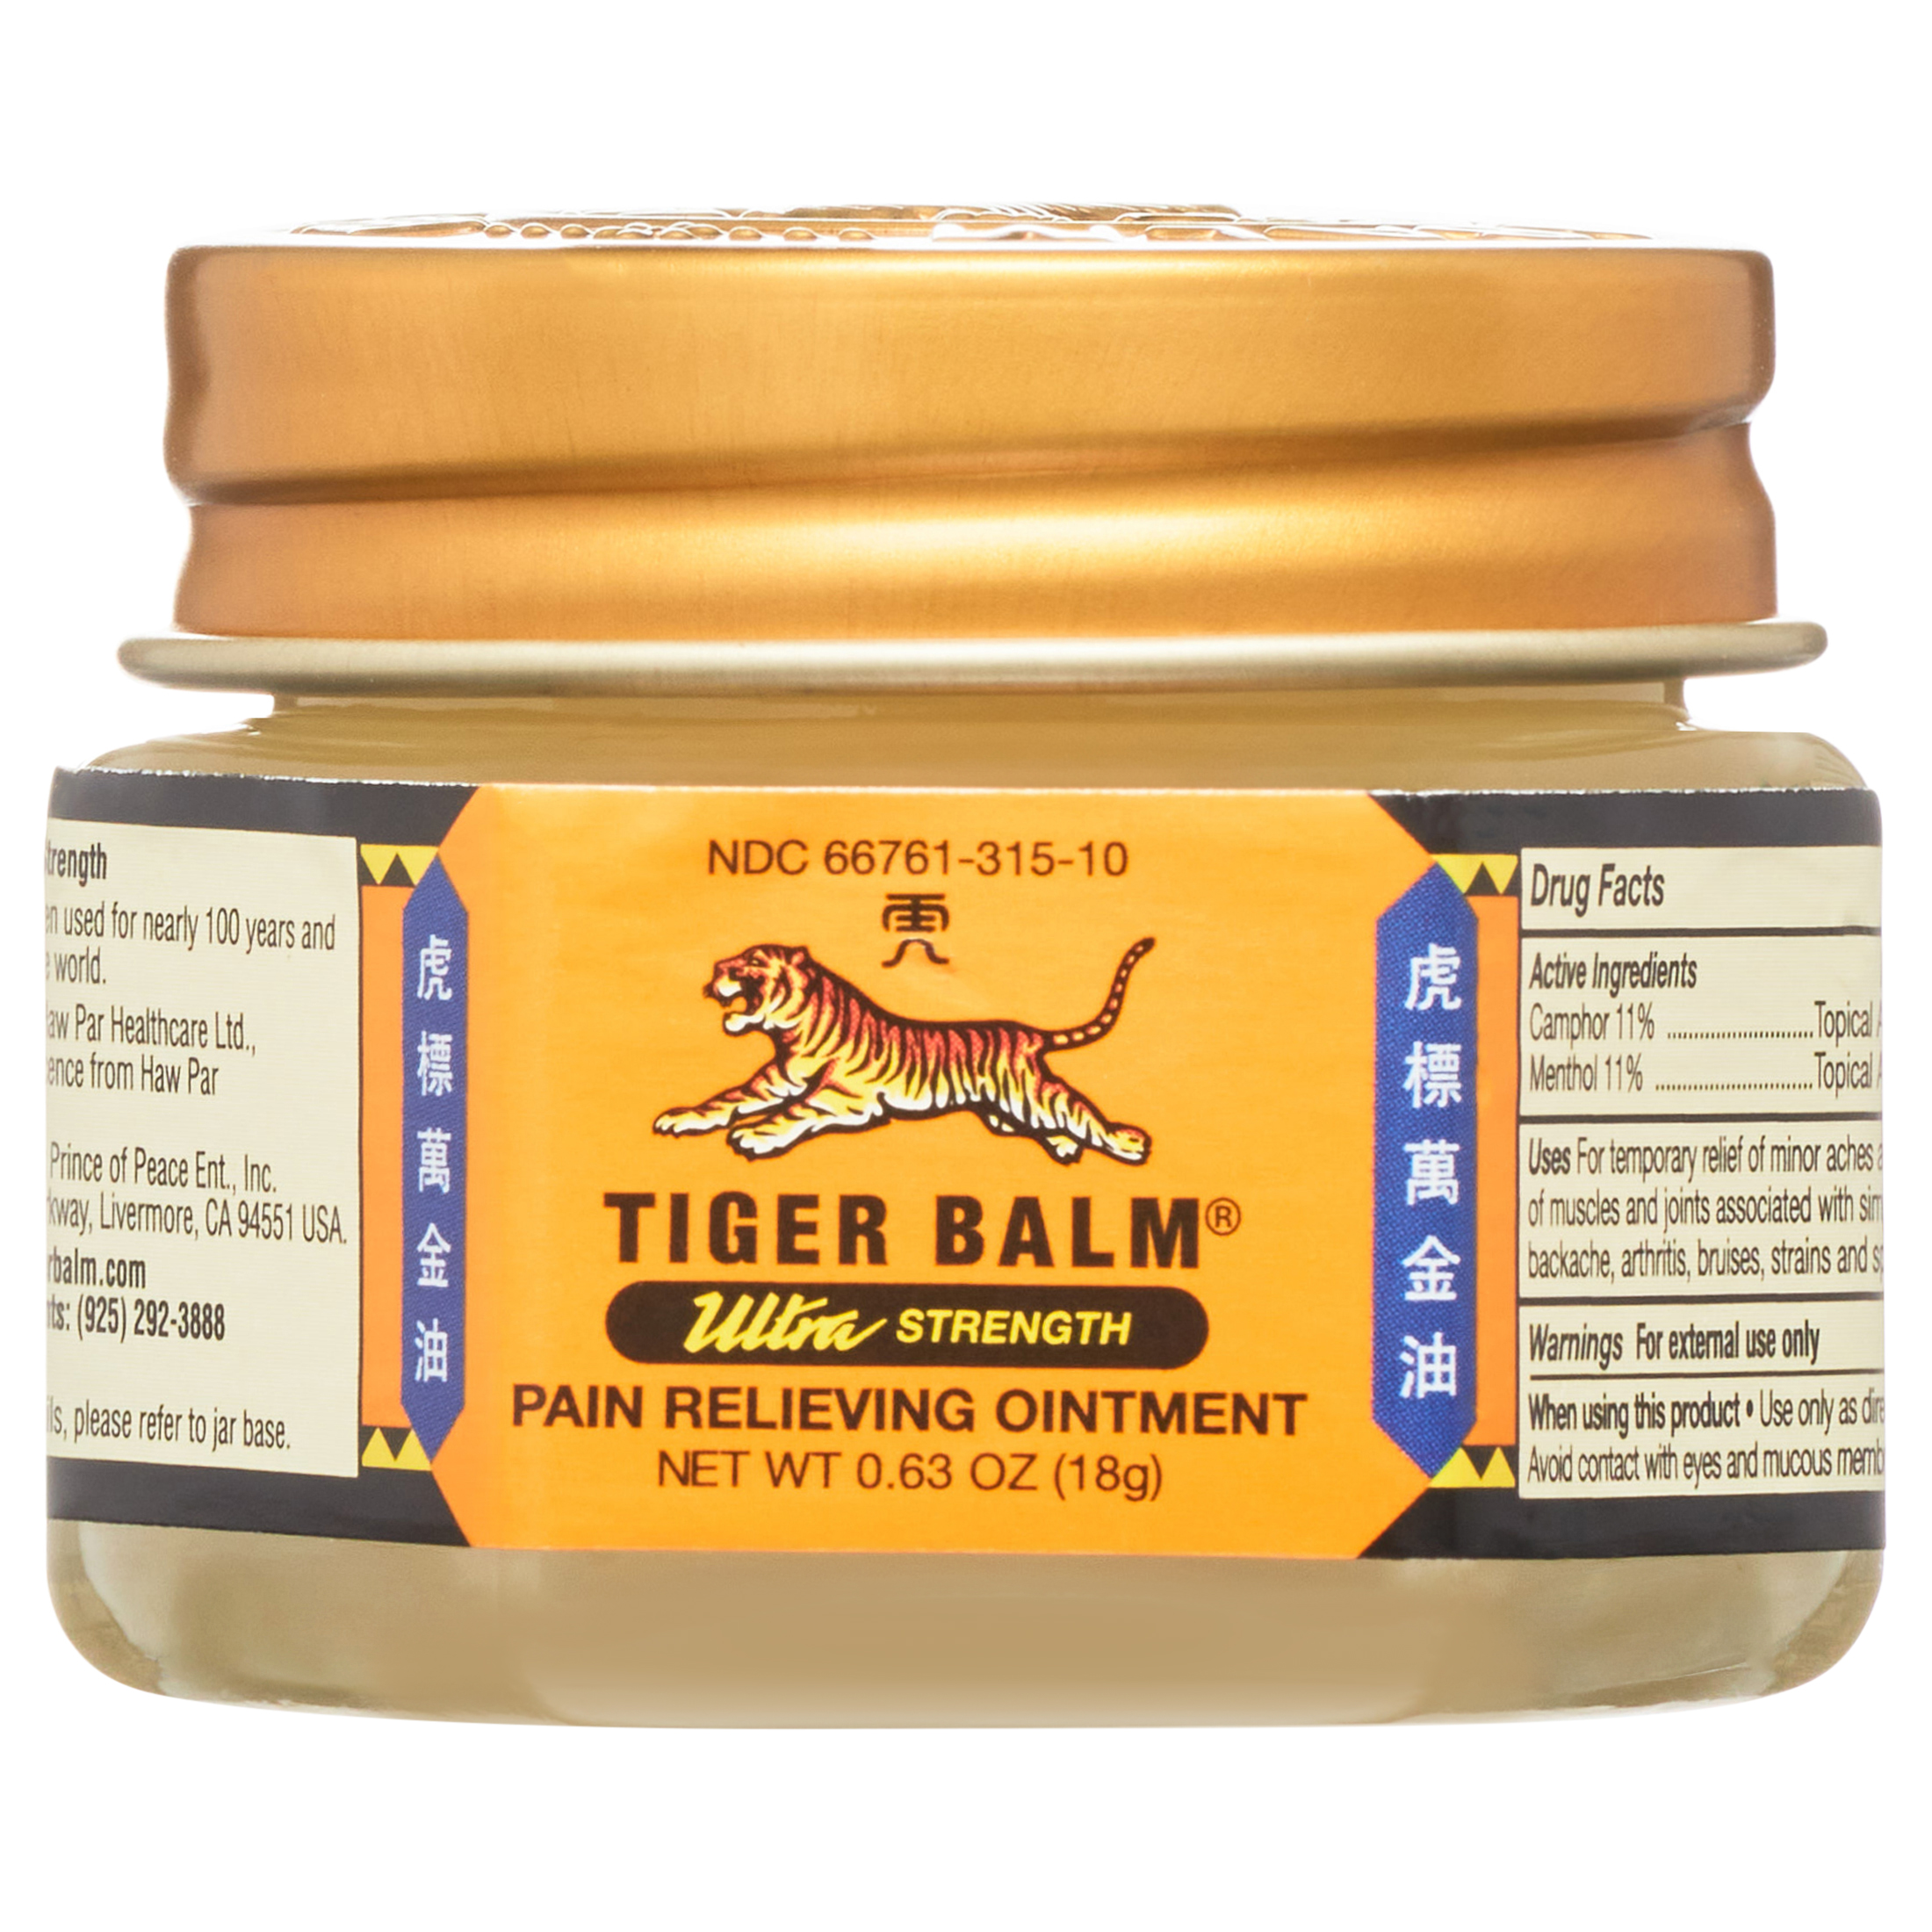 Tiger Balm Ultra Strength Pain Relieving Ointment, 0.63 oz Jar for Backaches Sore Muscles Bruises and Sprains - image 2 of 10